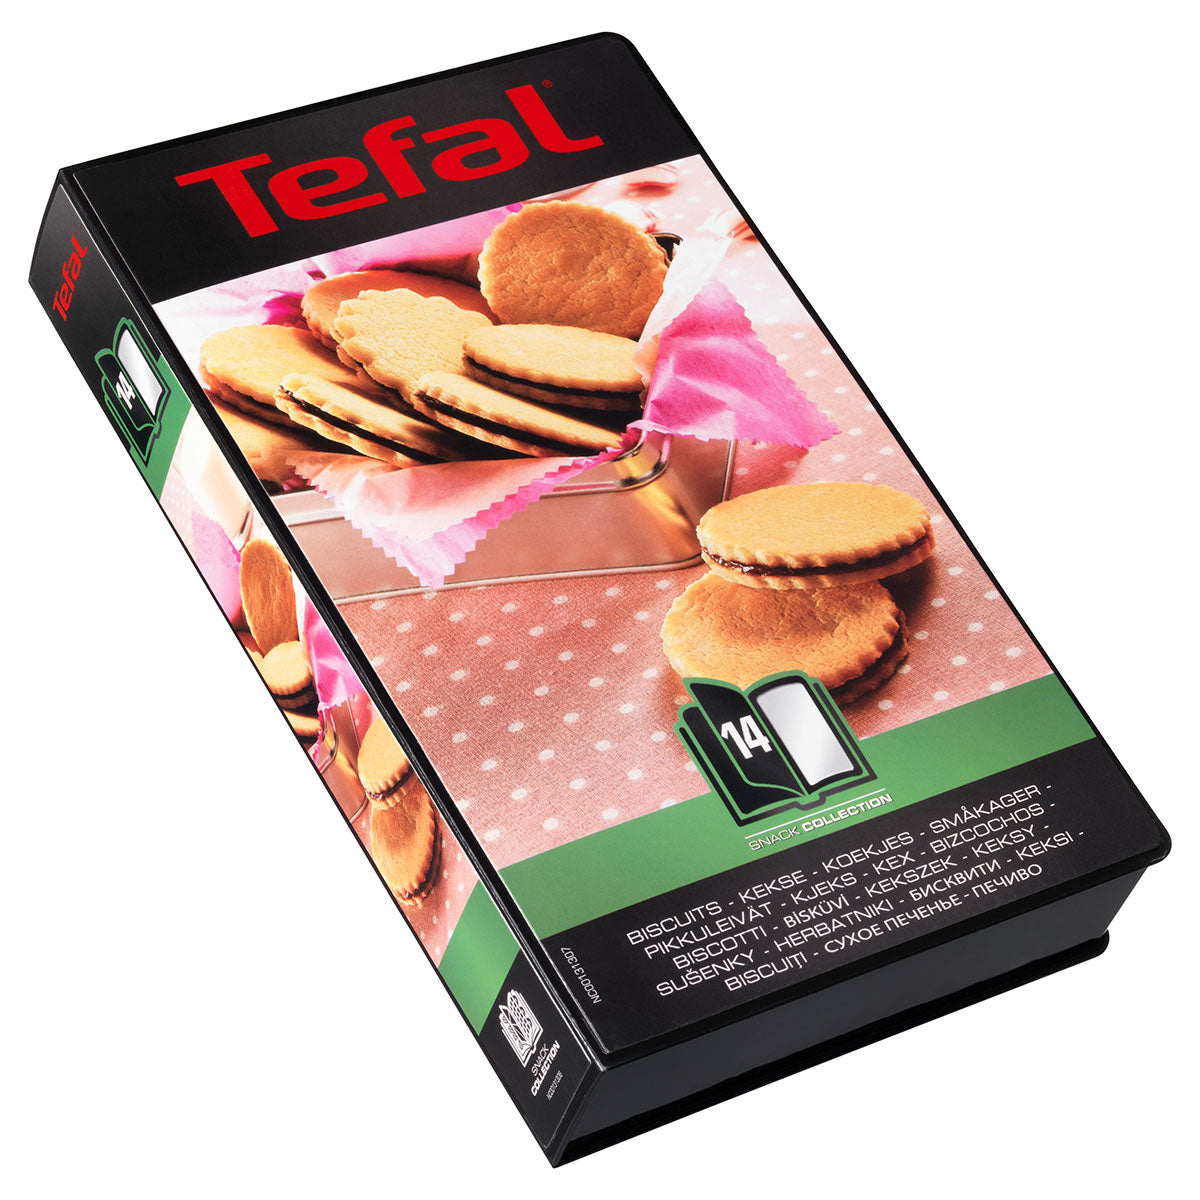 Tefal Snack Collection - box 14: Biscuits